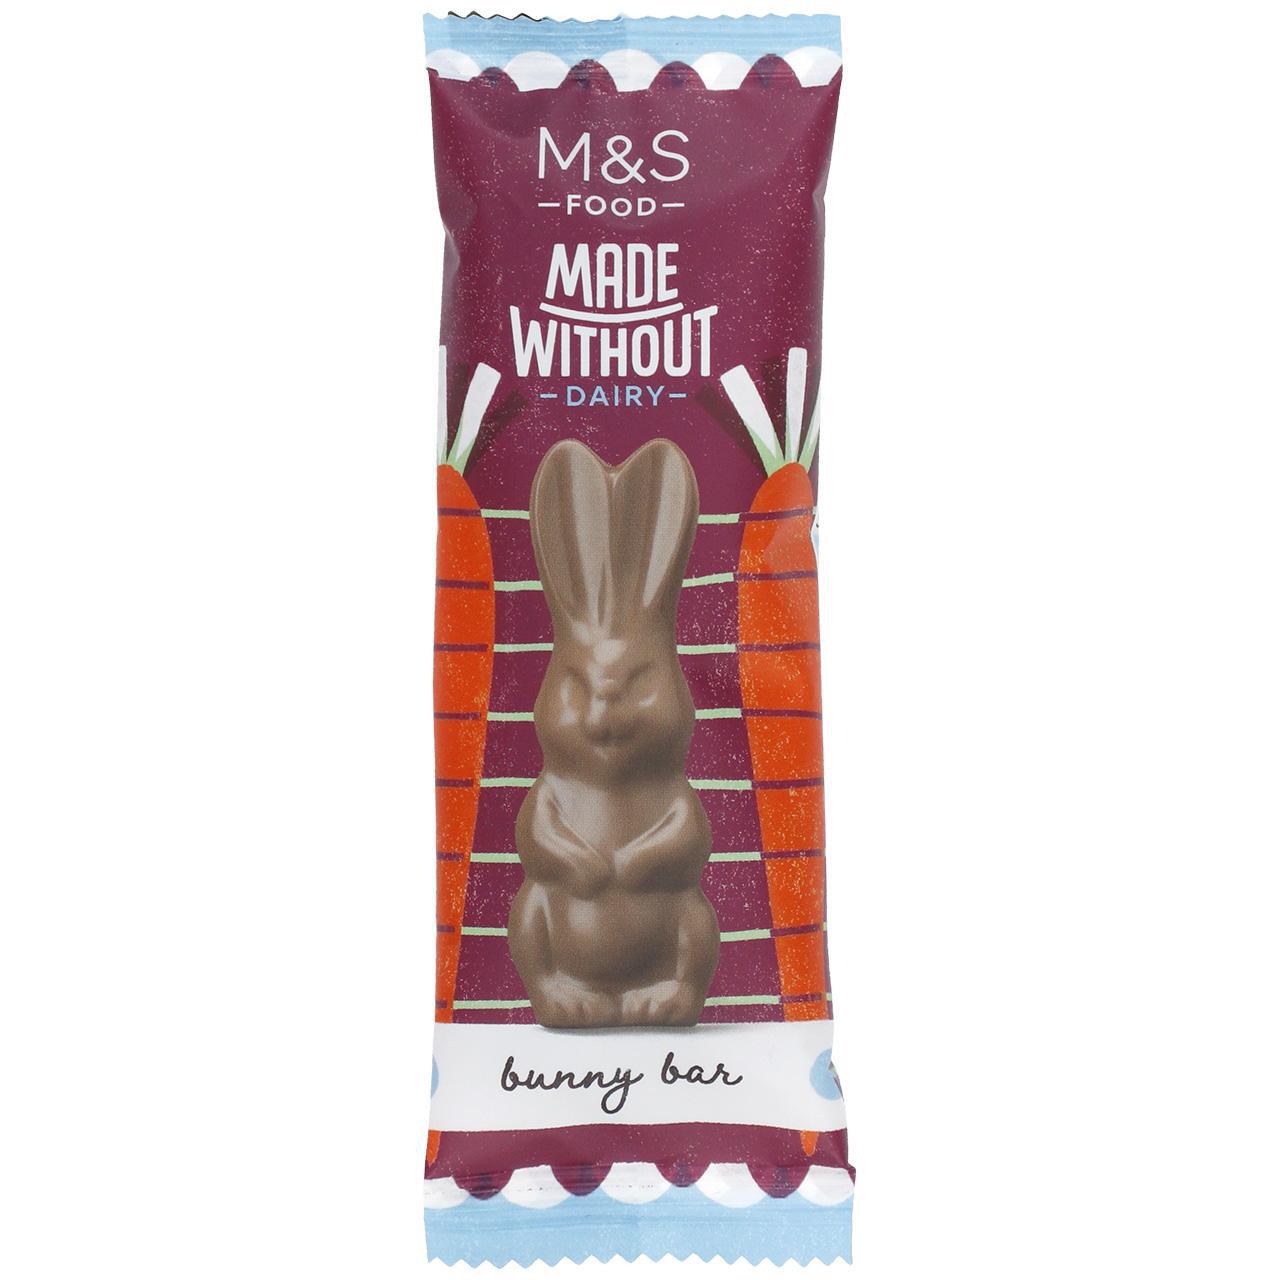 M&S Made Without Dairy Bunny Bar 18g